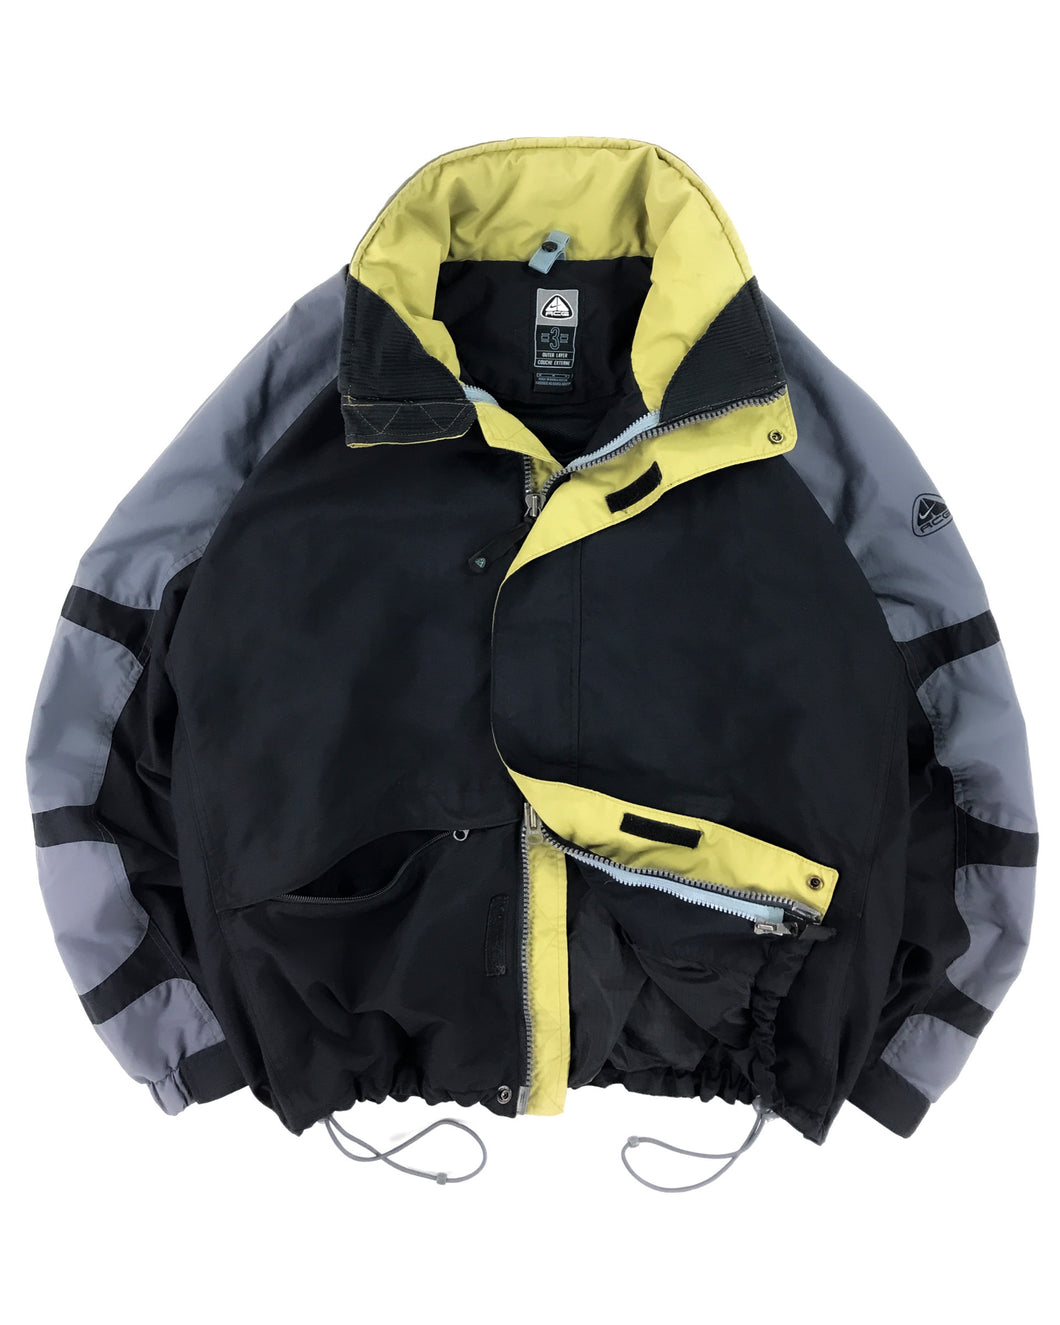 ACG Storm Clad Water Resistant Ski Jacket (Early 2000’s)(M-L)